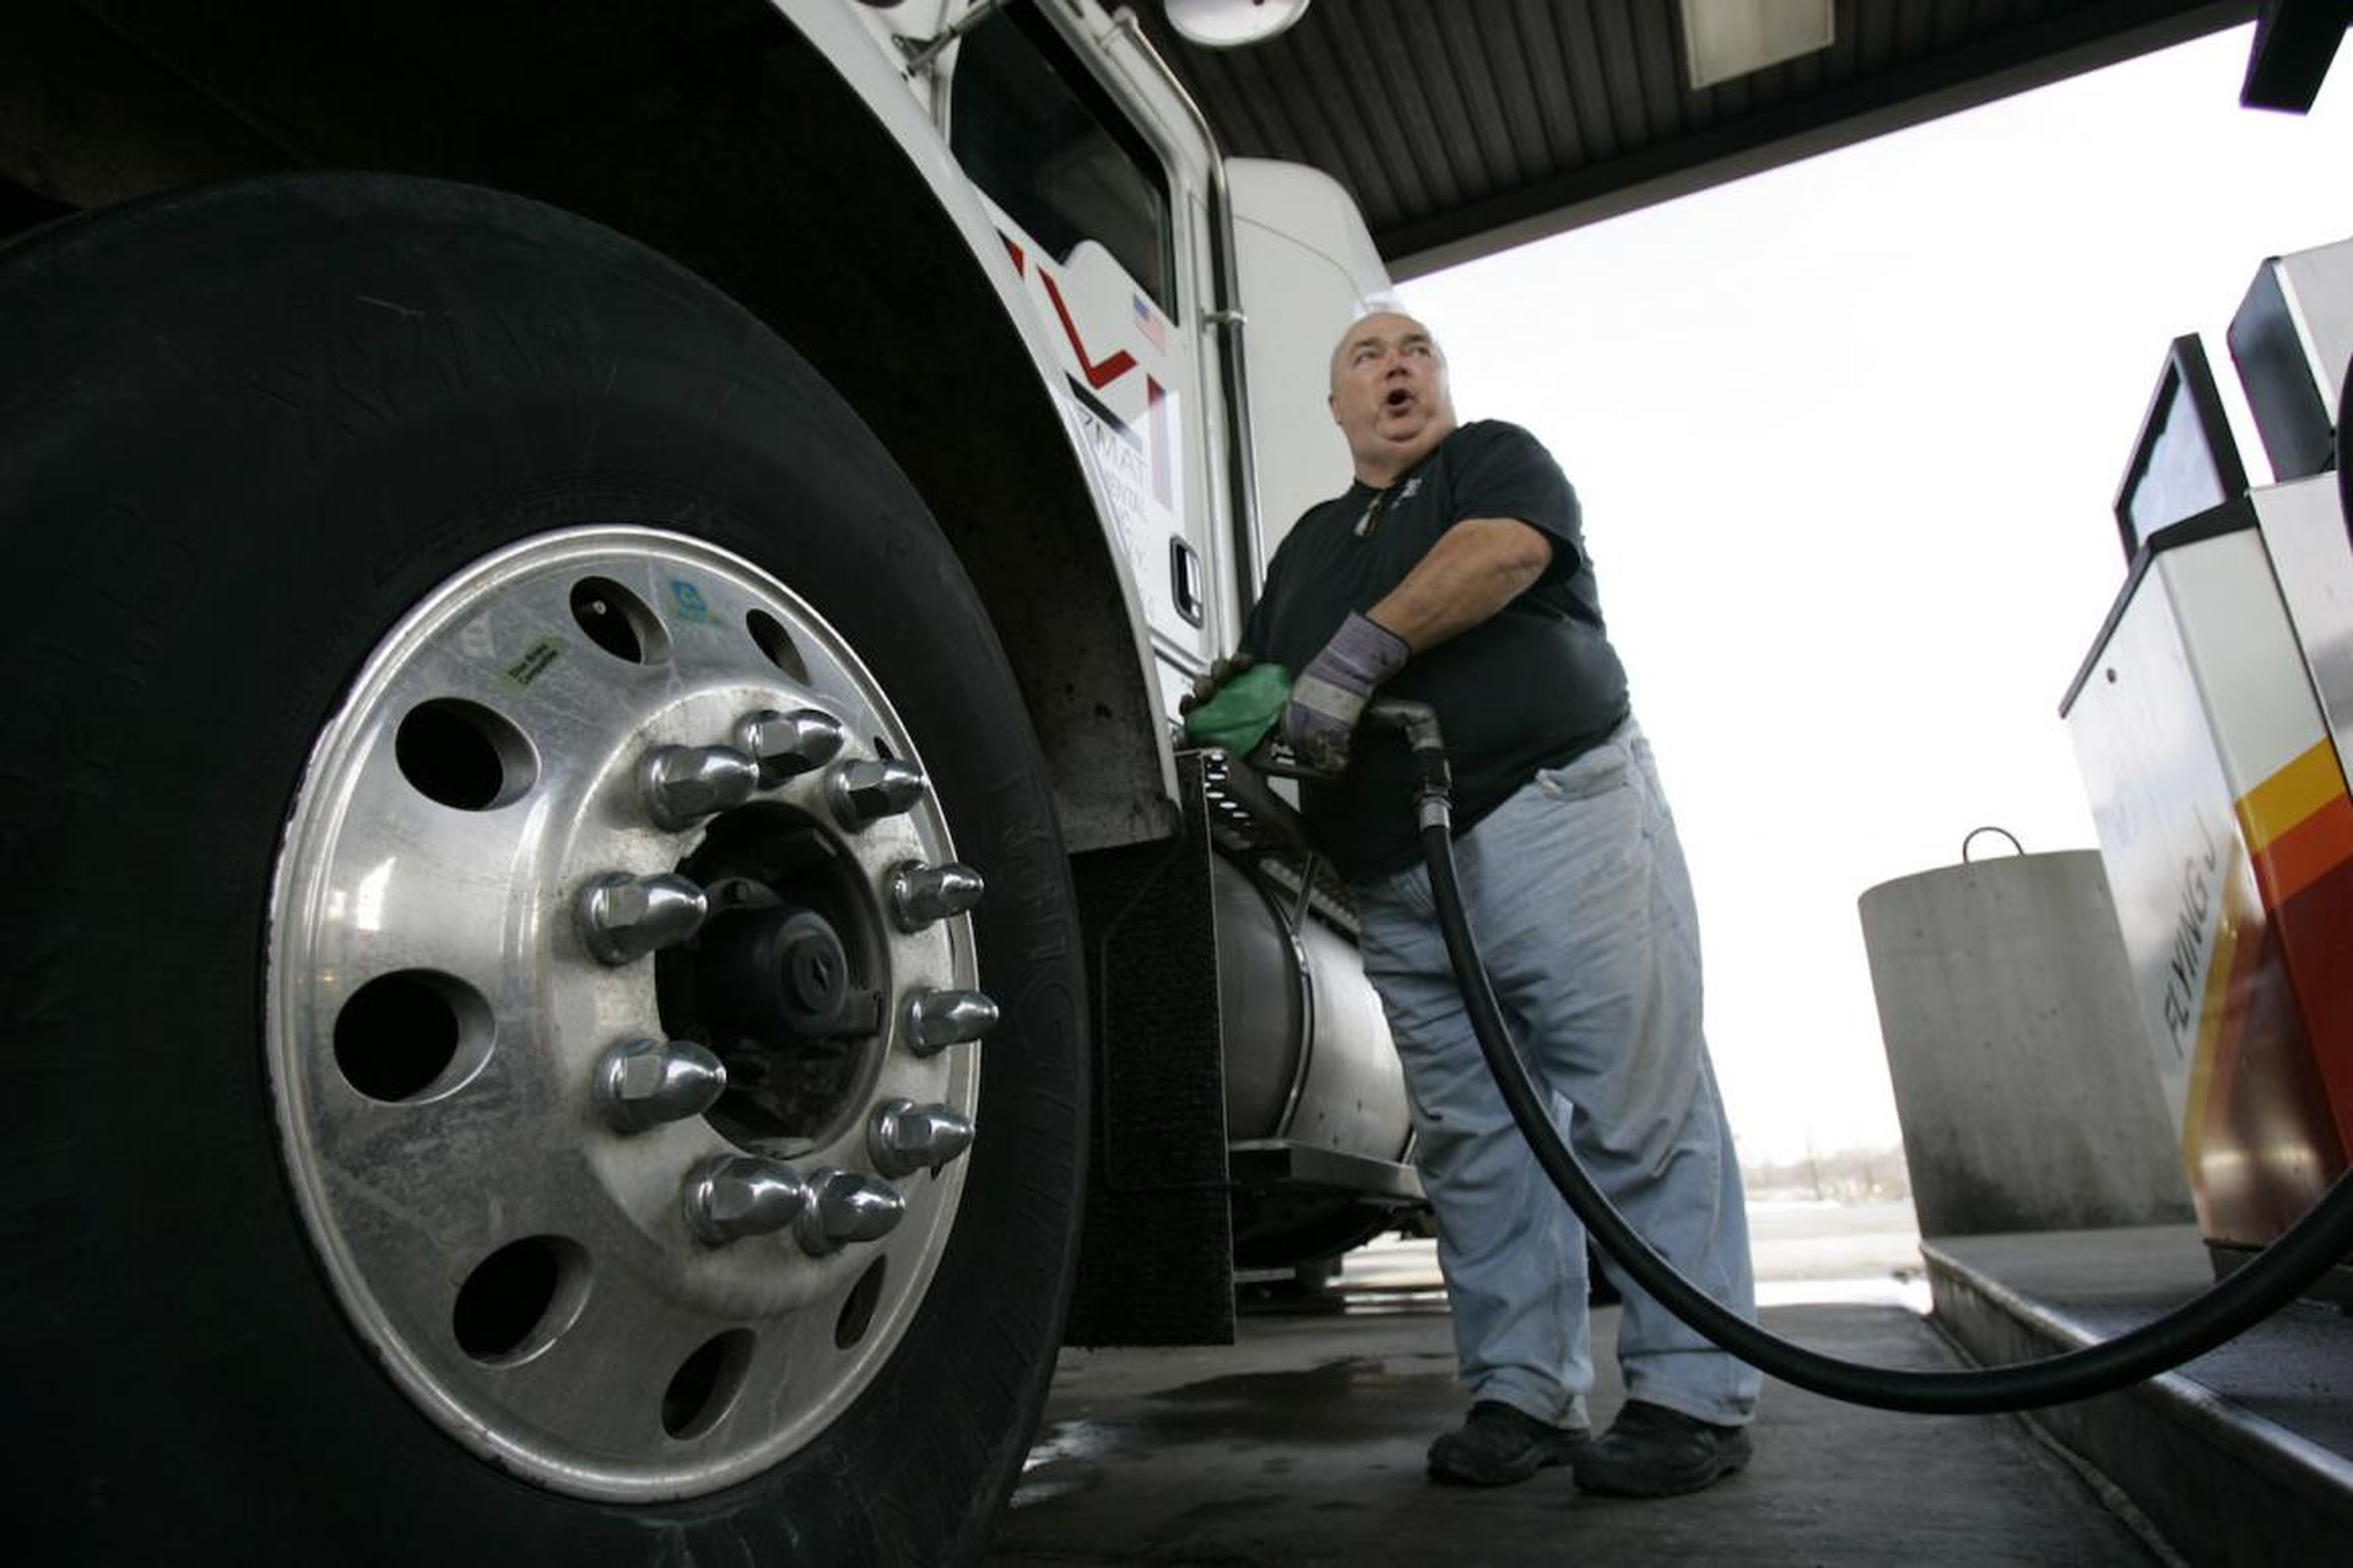 Truck drivers earn less than most Americans in terms of annual income